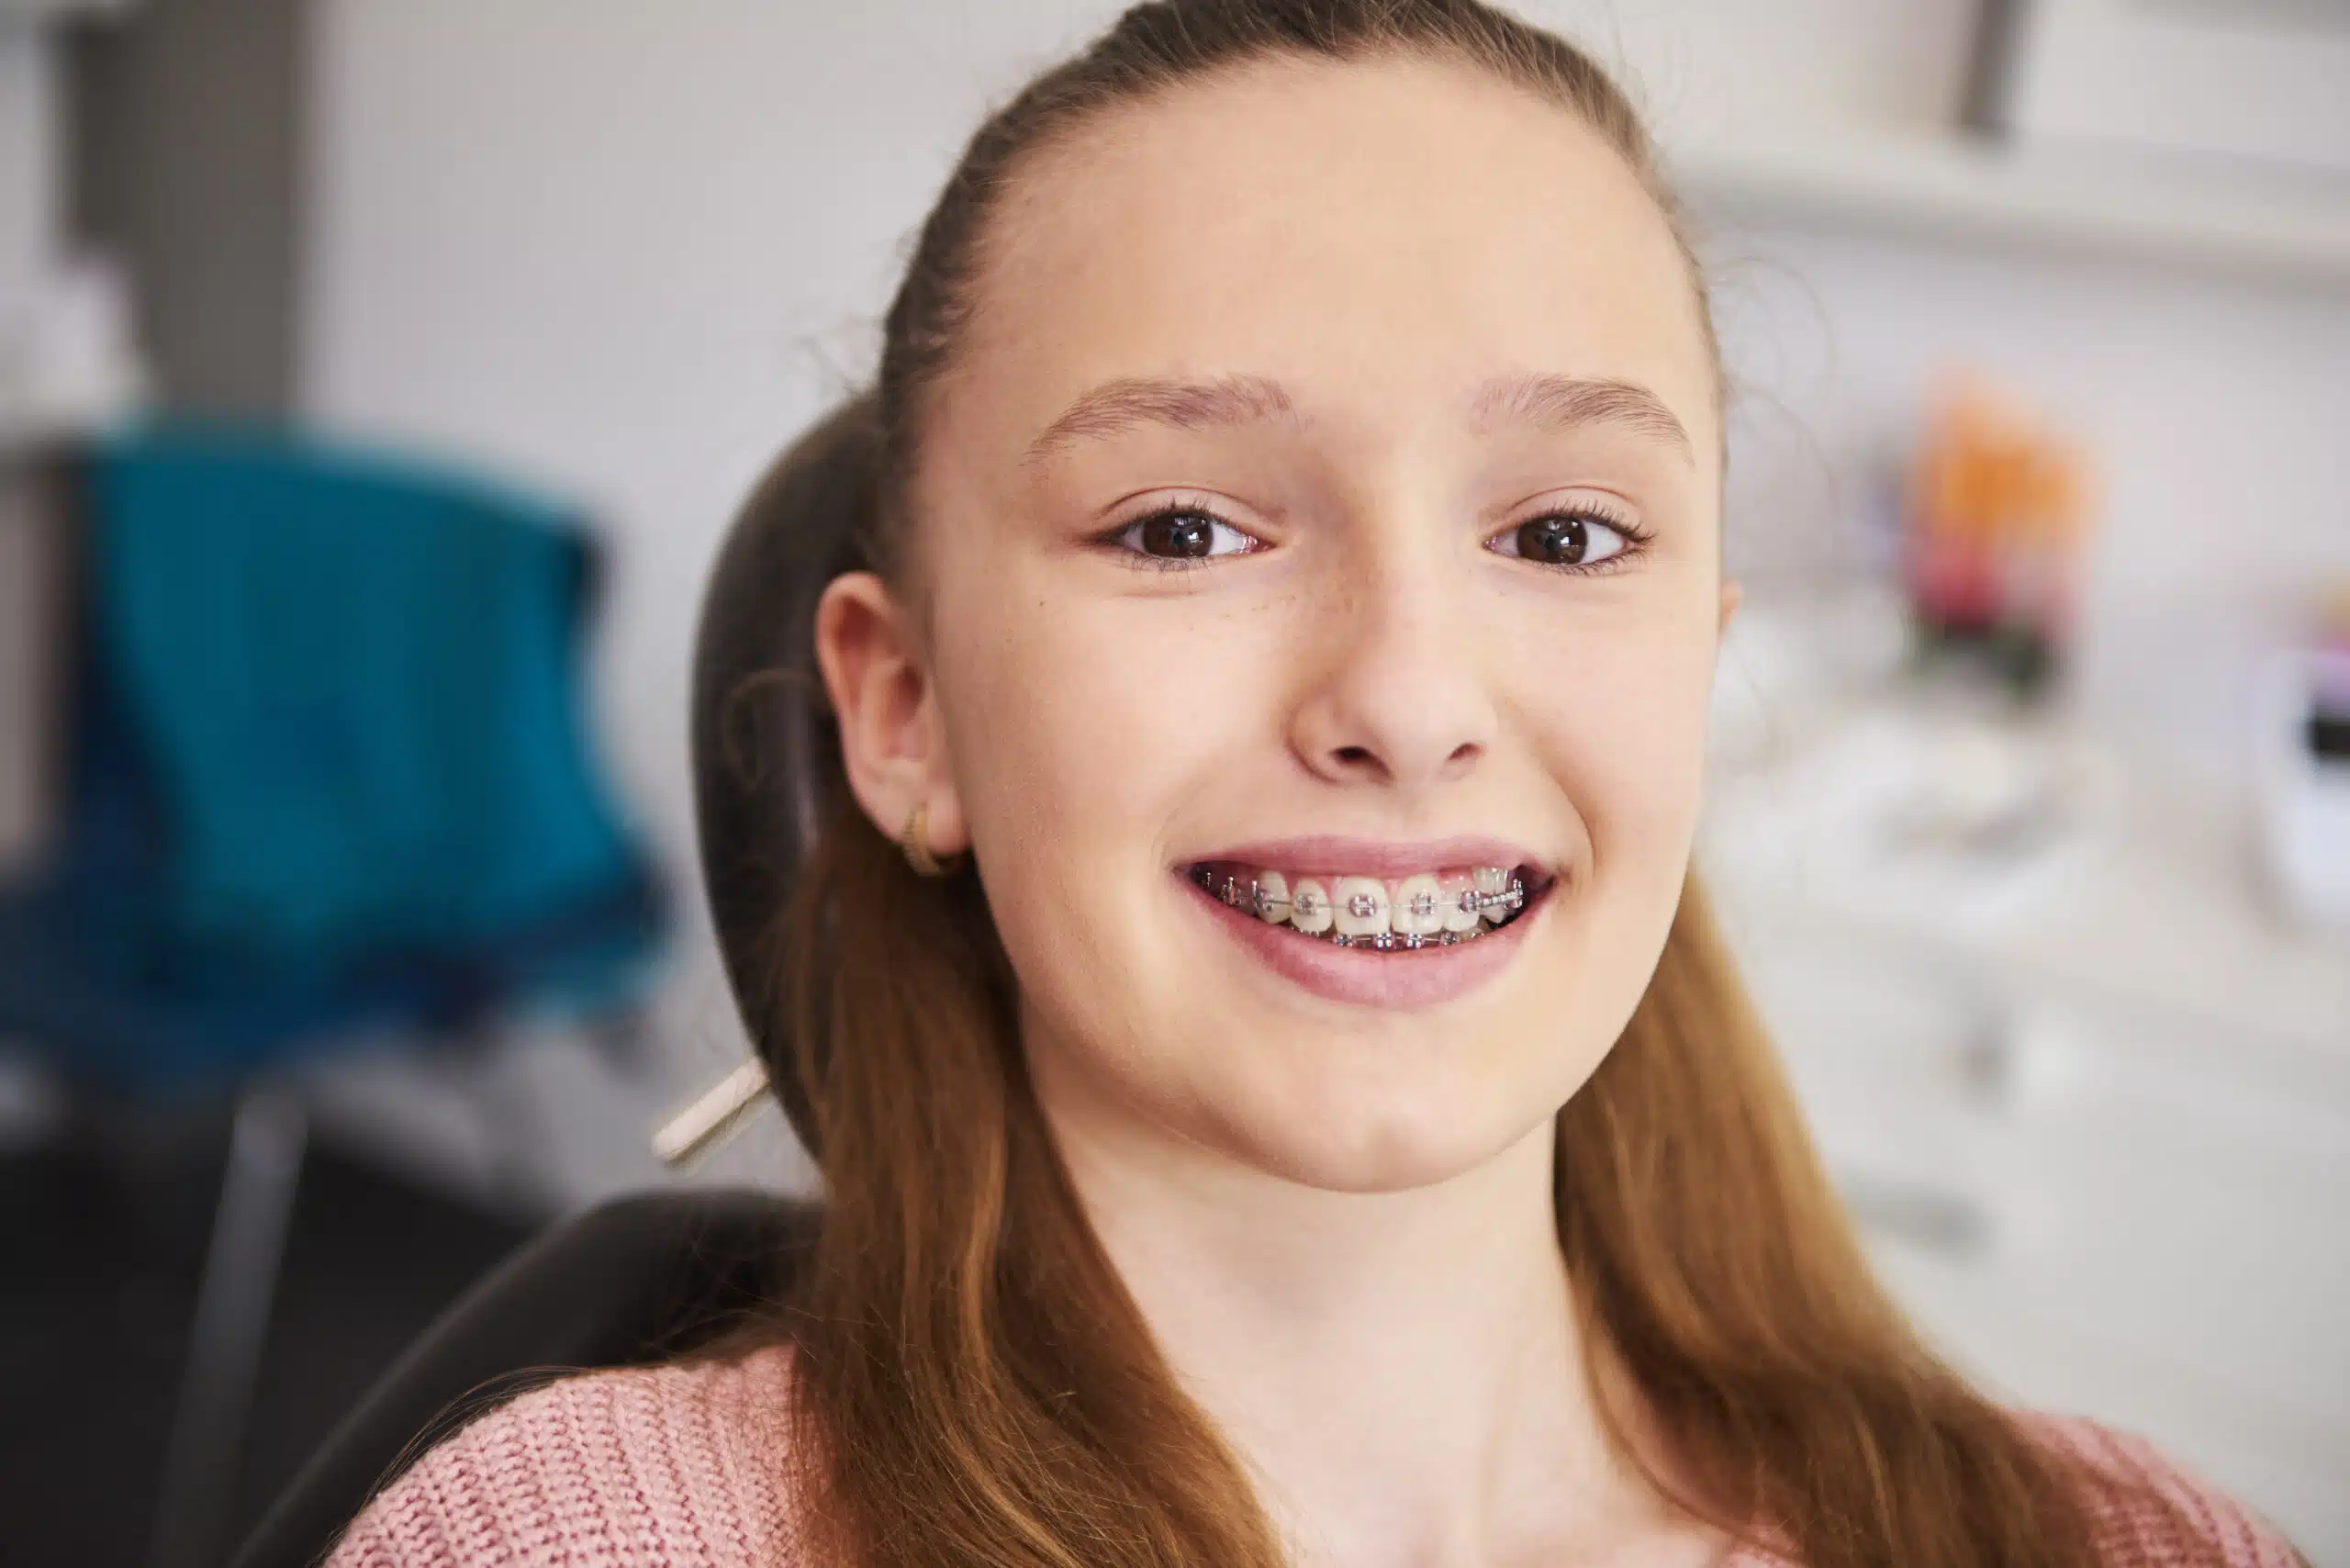 Our orthodontic specialist can provide a personalized treatment plan that addresses your child's unique needs and goals.